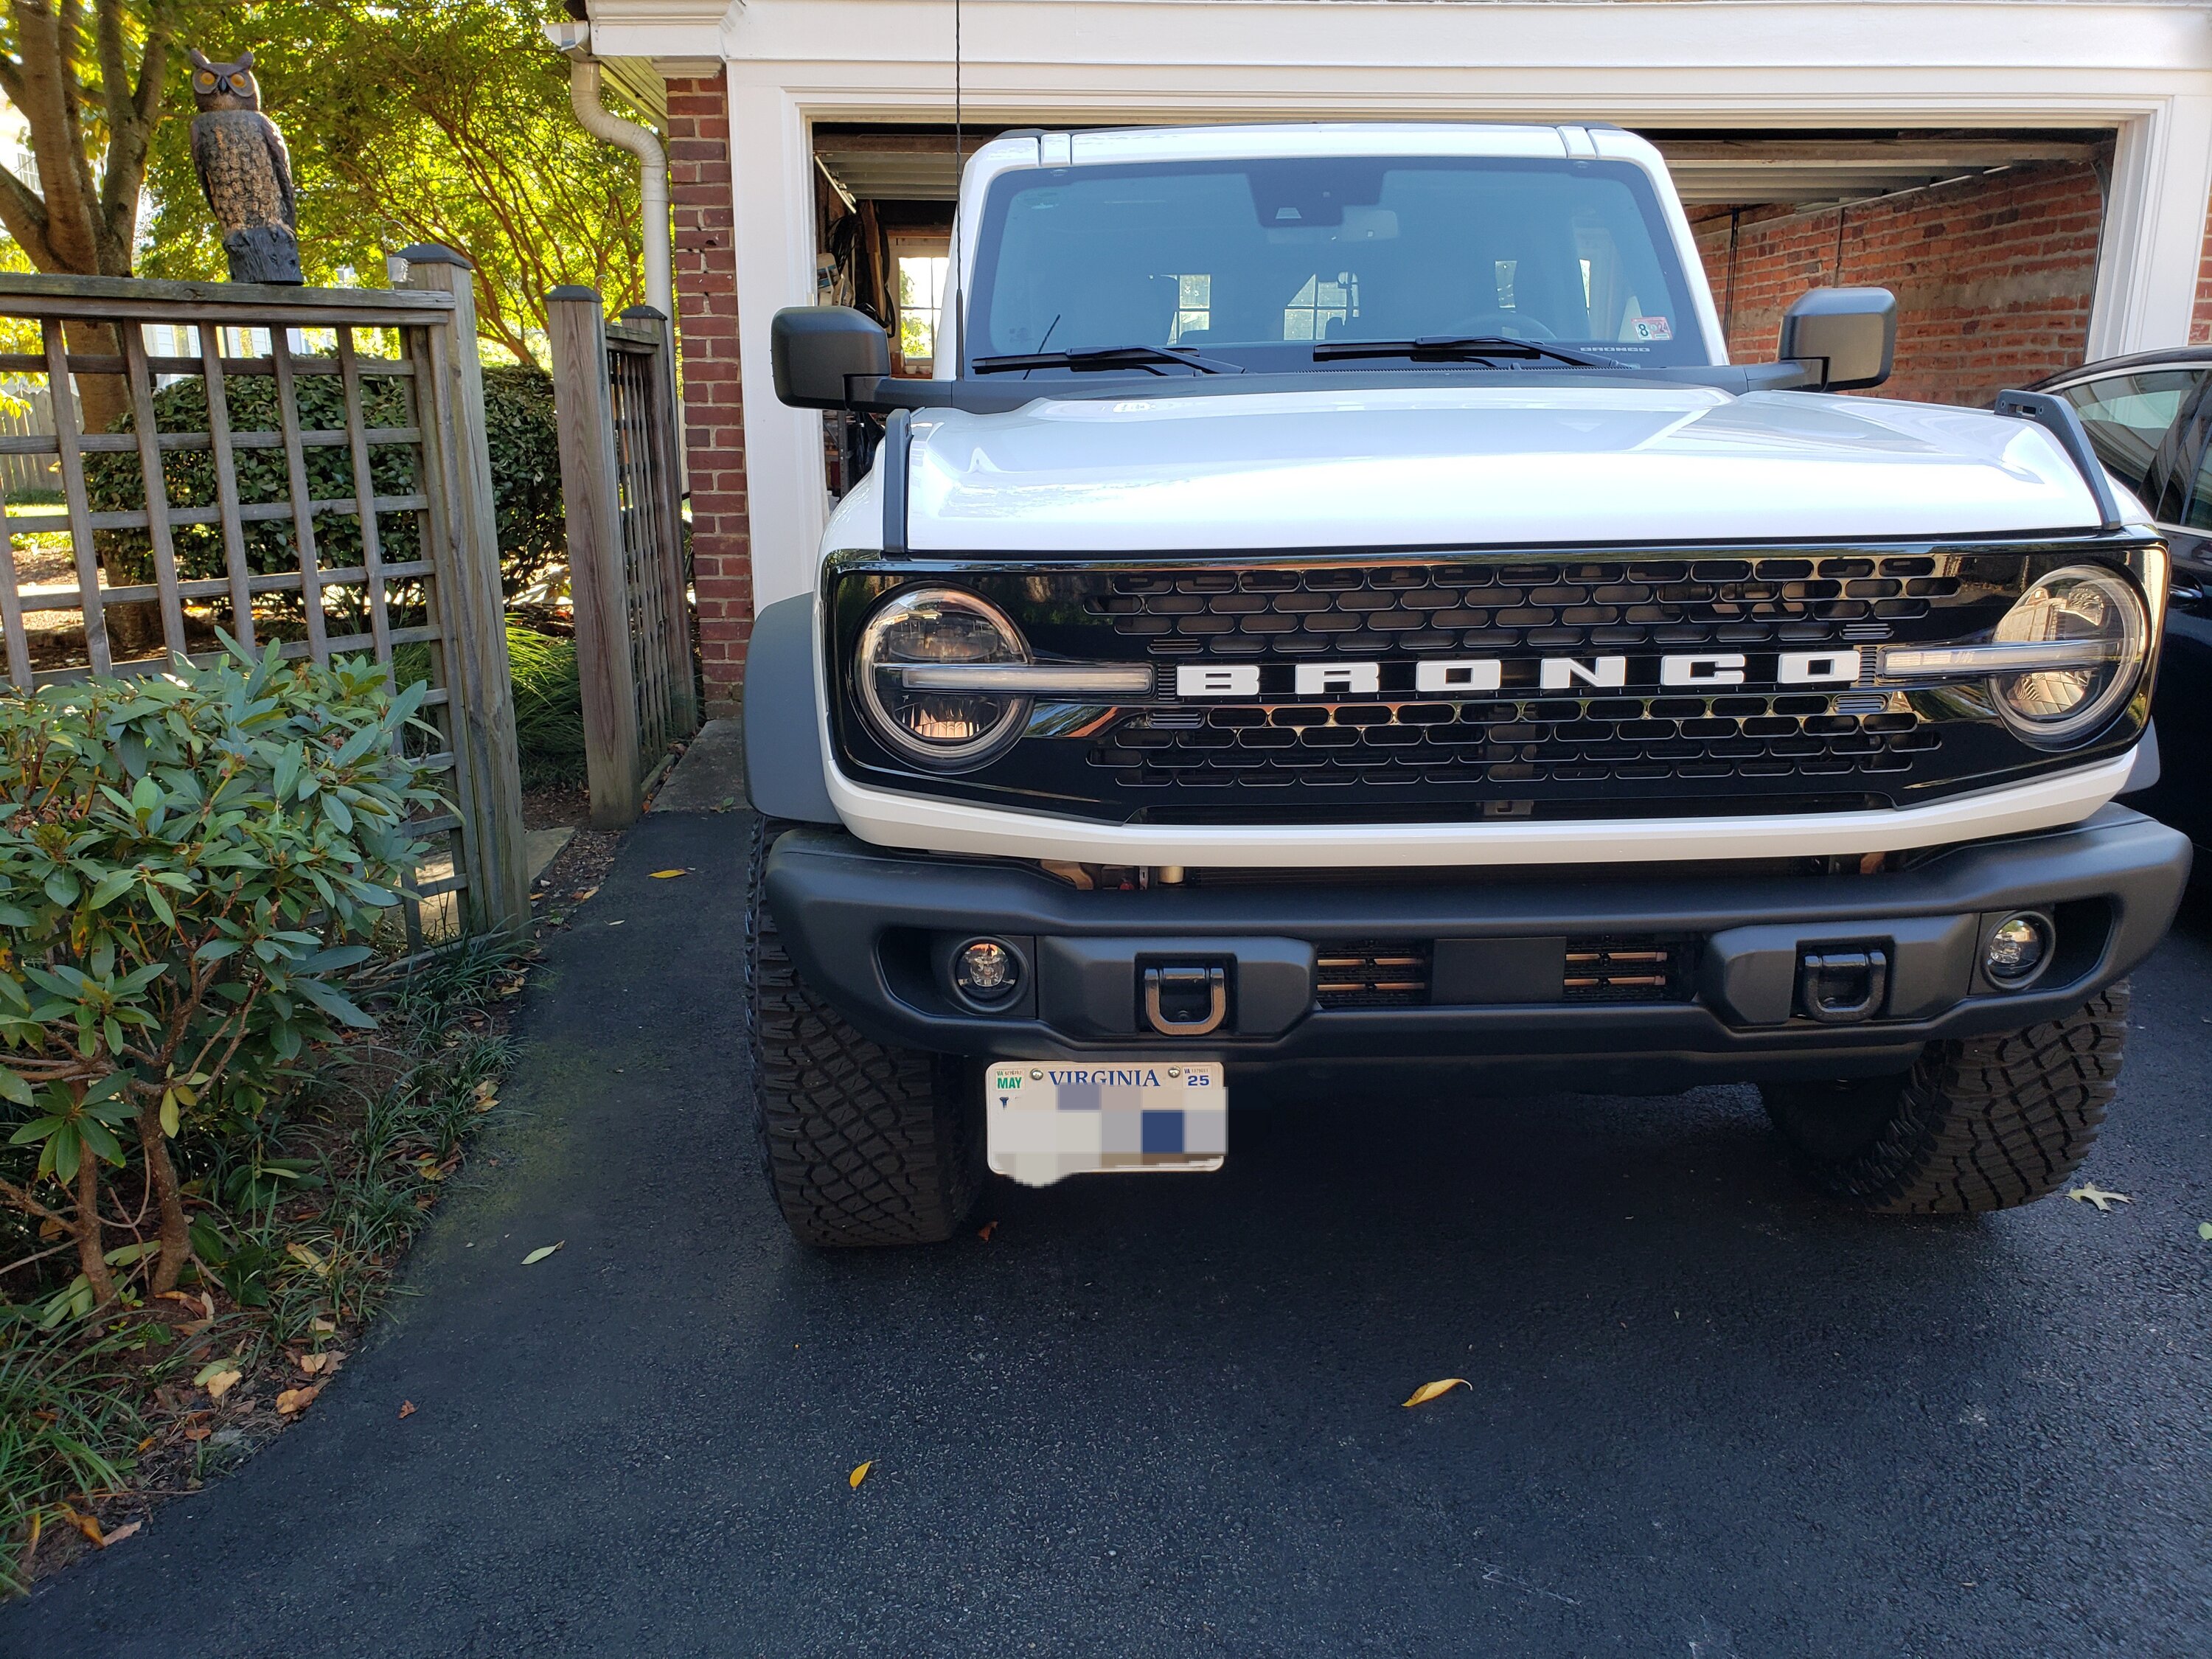 Ford Bronco Capable bumper license plate bracket options? 20230831_181647